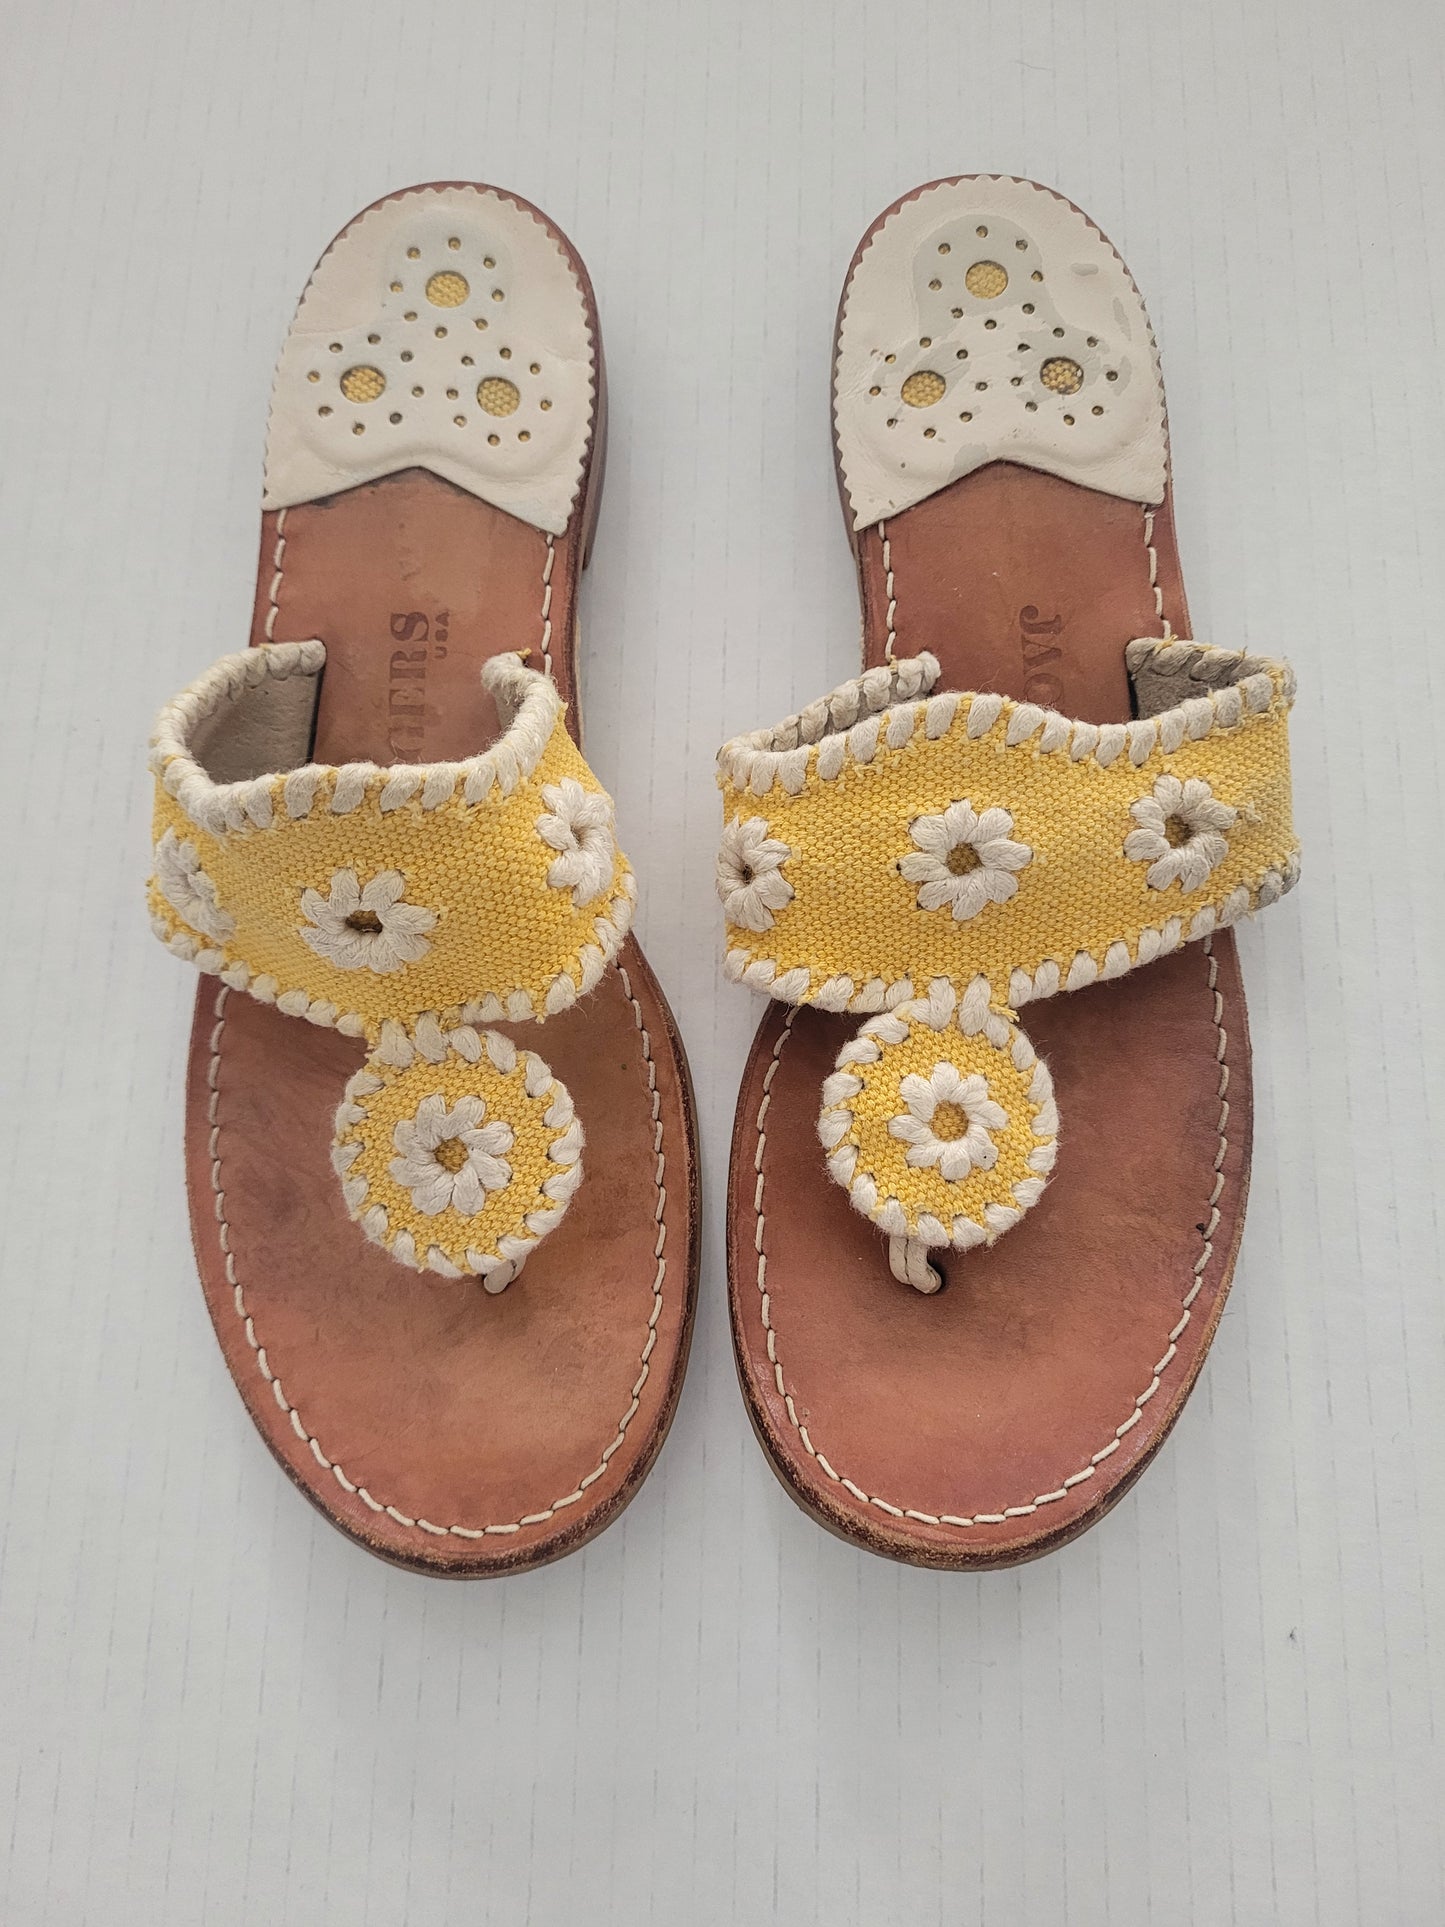 Jack Rogers Women's Yellow Sandals Size 7